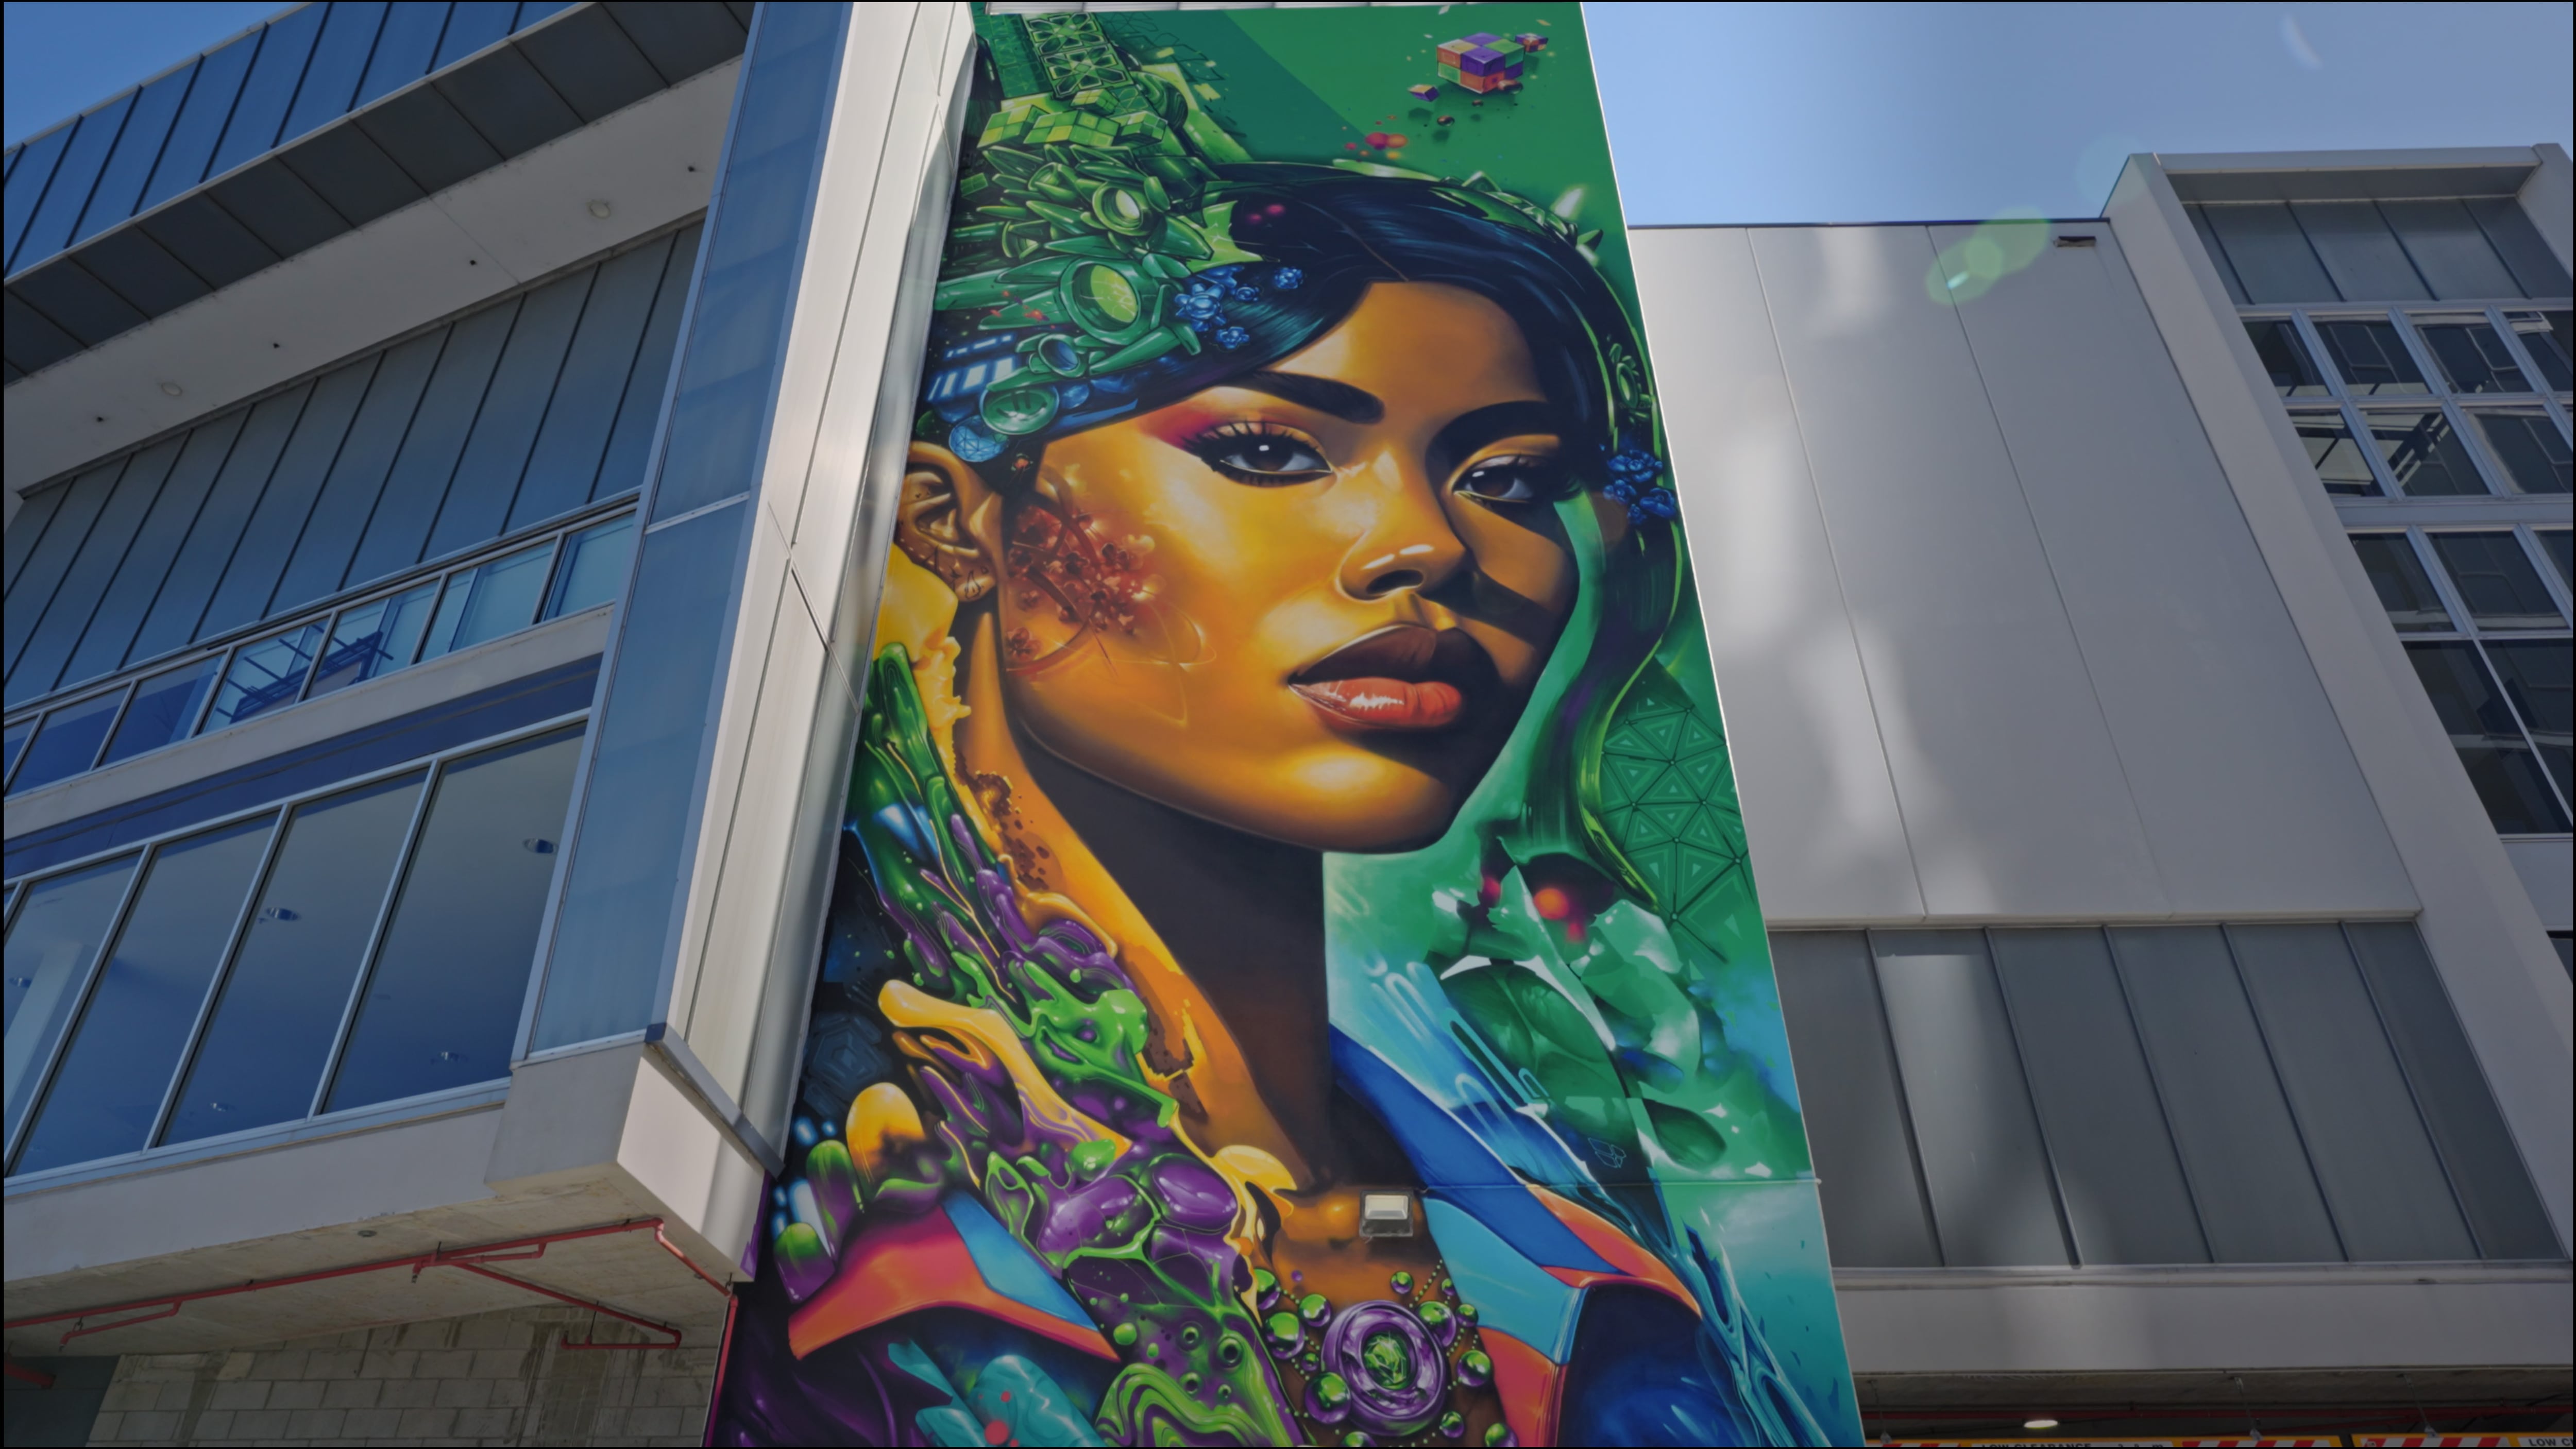 "Portside Portal" mural of a woman with dark features surrounded by colorful shapes and designs